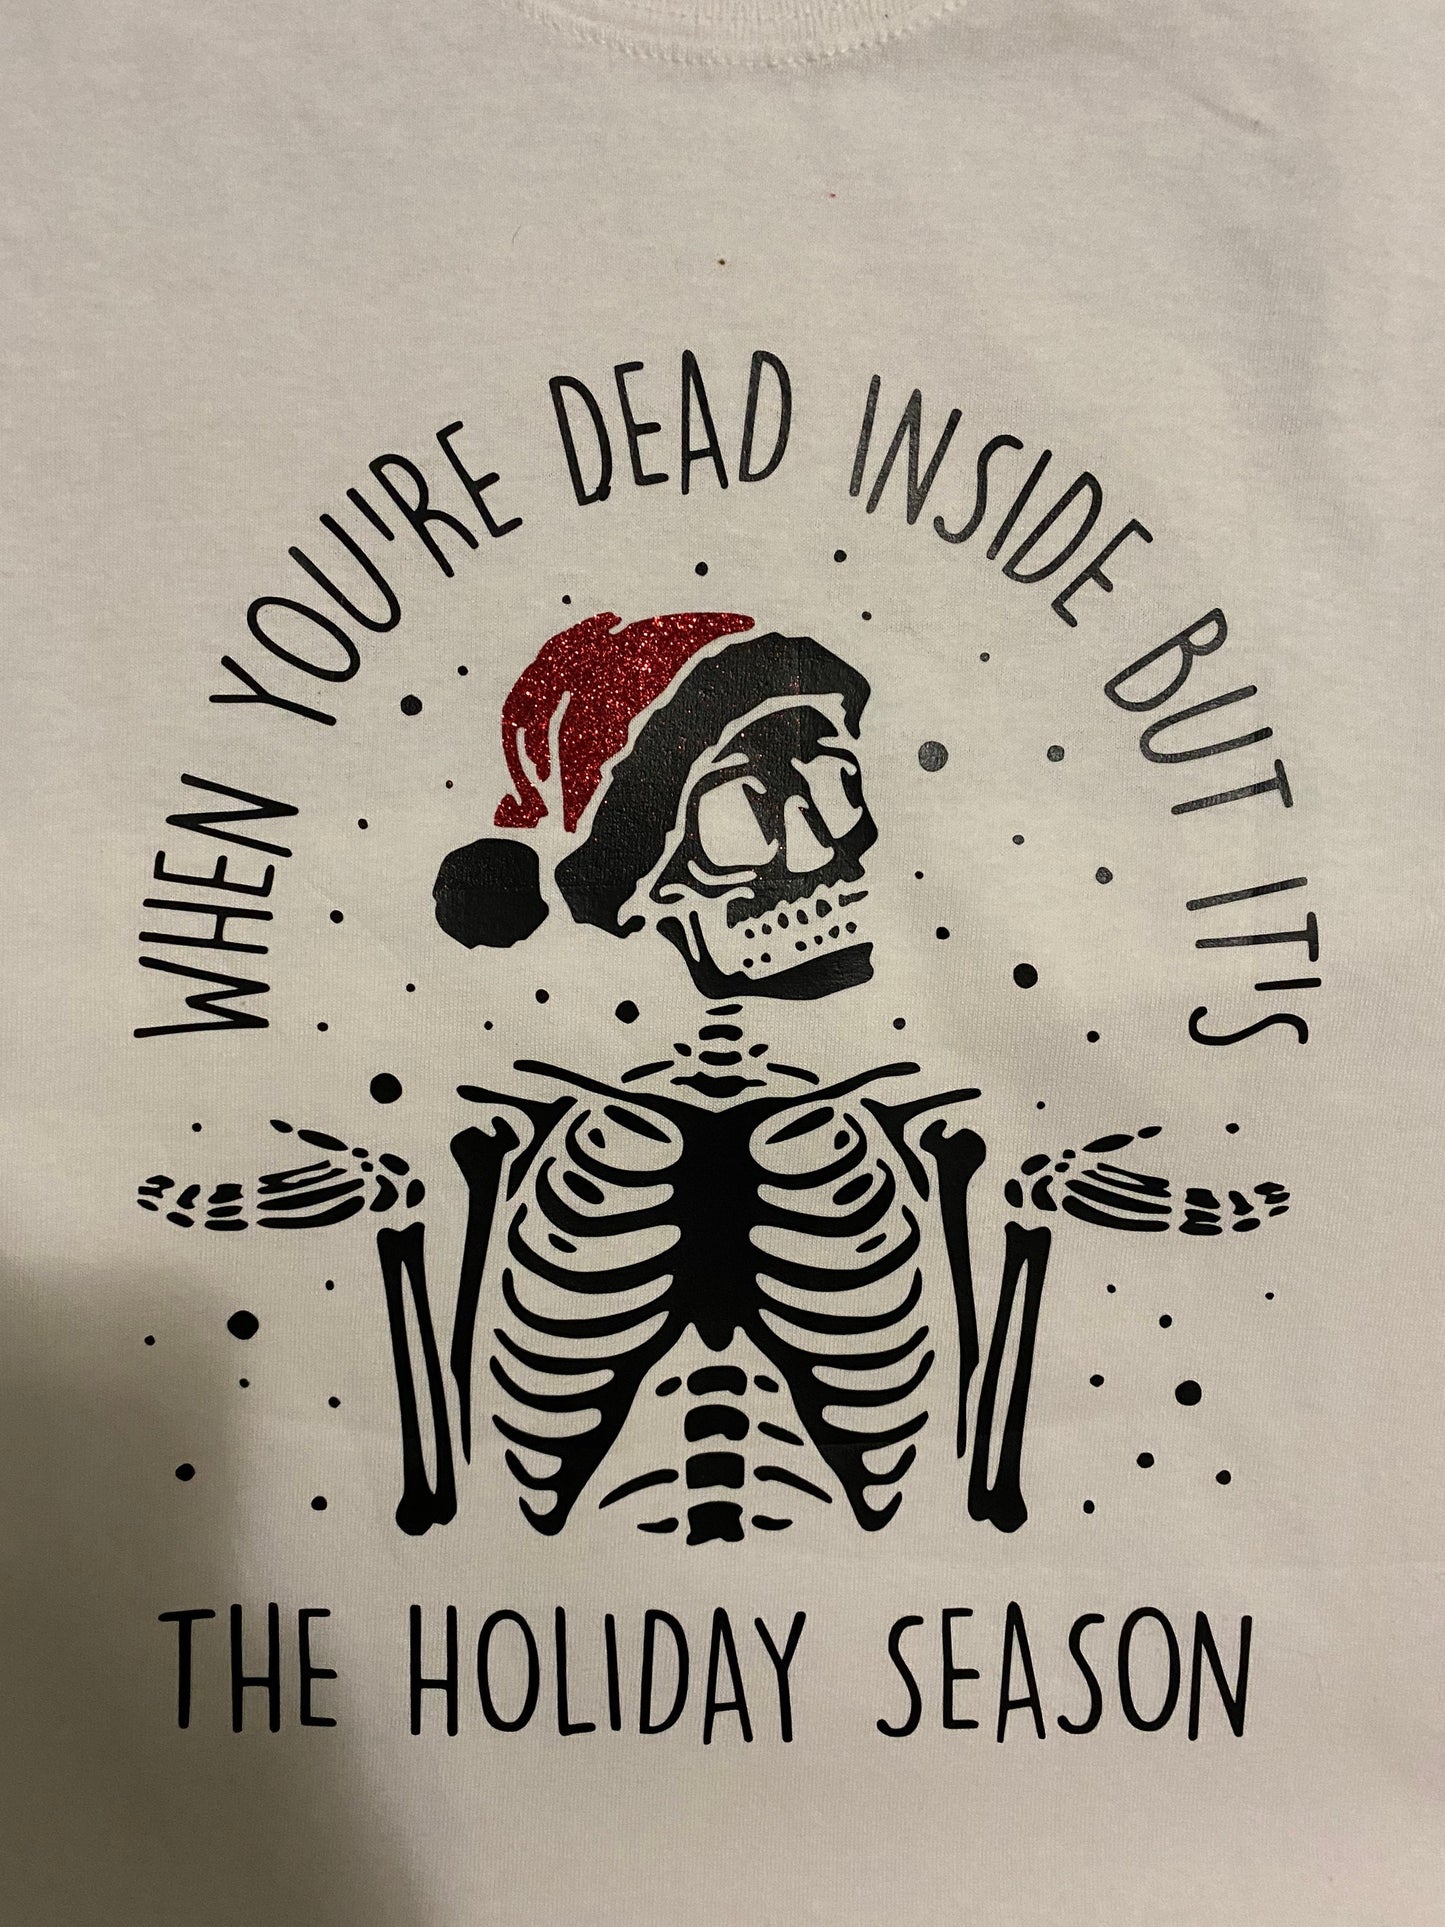 When You're Dead Inside But It's The Holiday Season